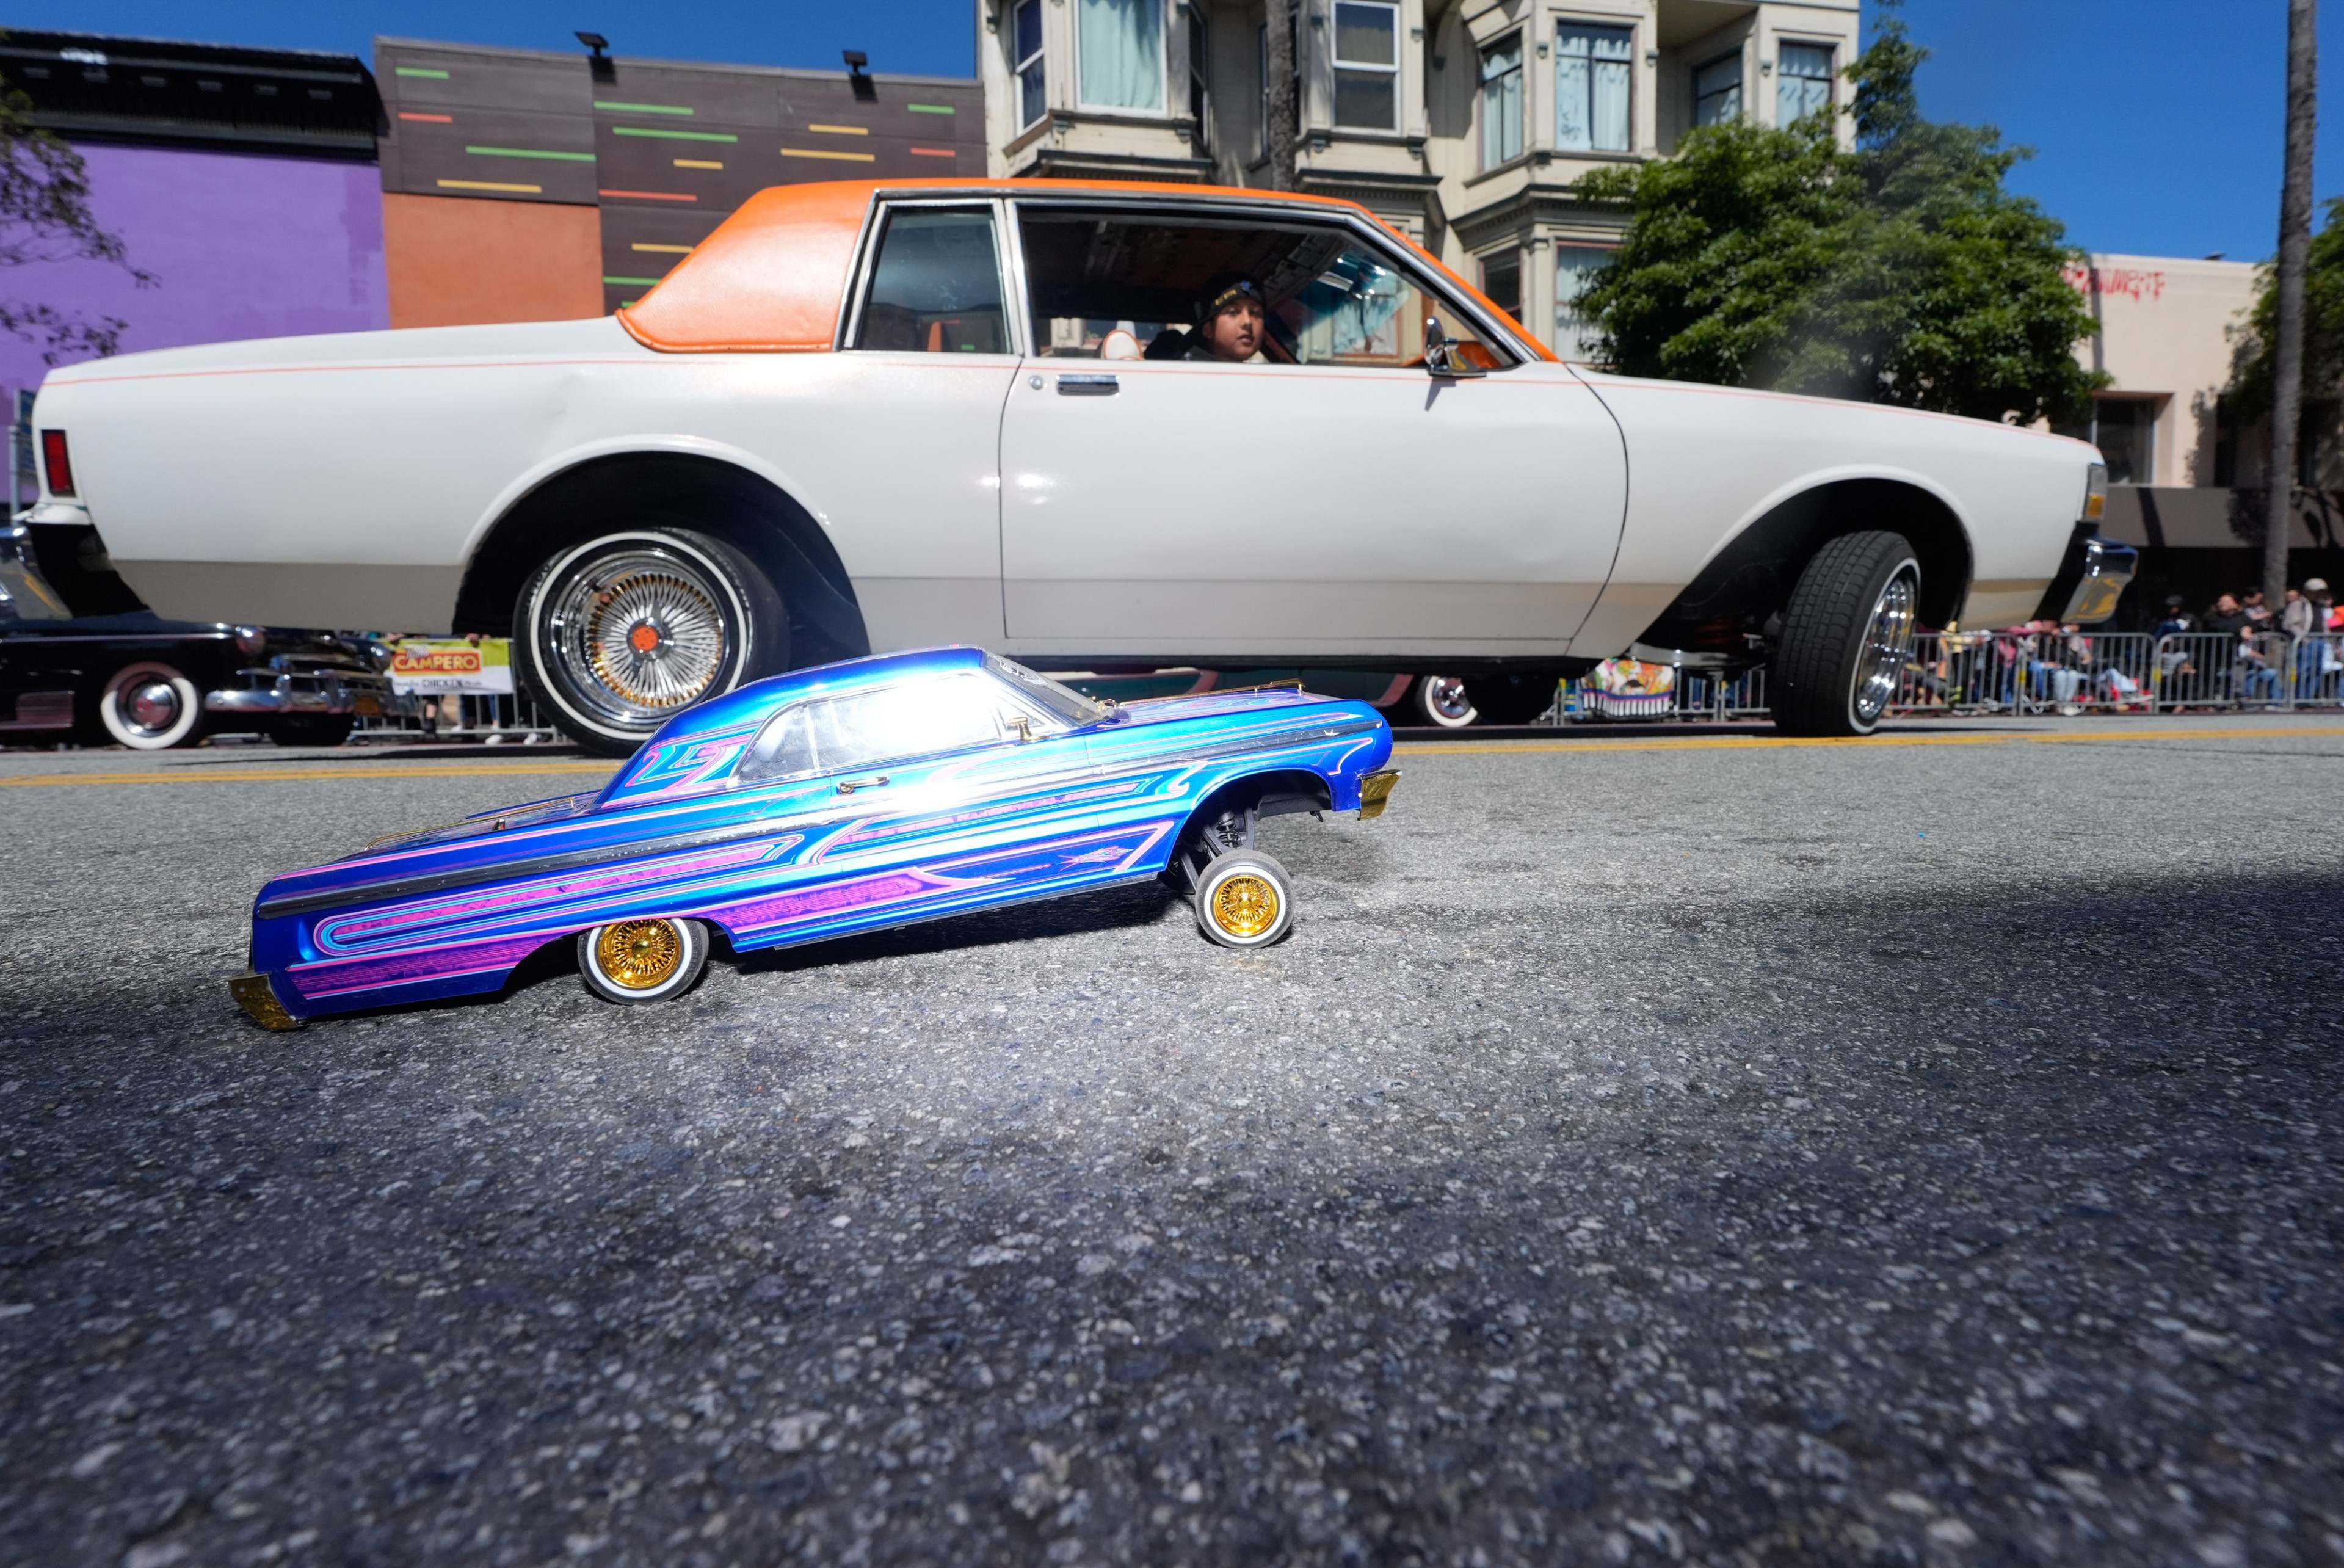 A small, colorful toy car with elaborate blue and purple designs is on the street, positioned in front of a larger white car with an orange roof and chrome wheels.